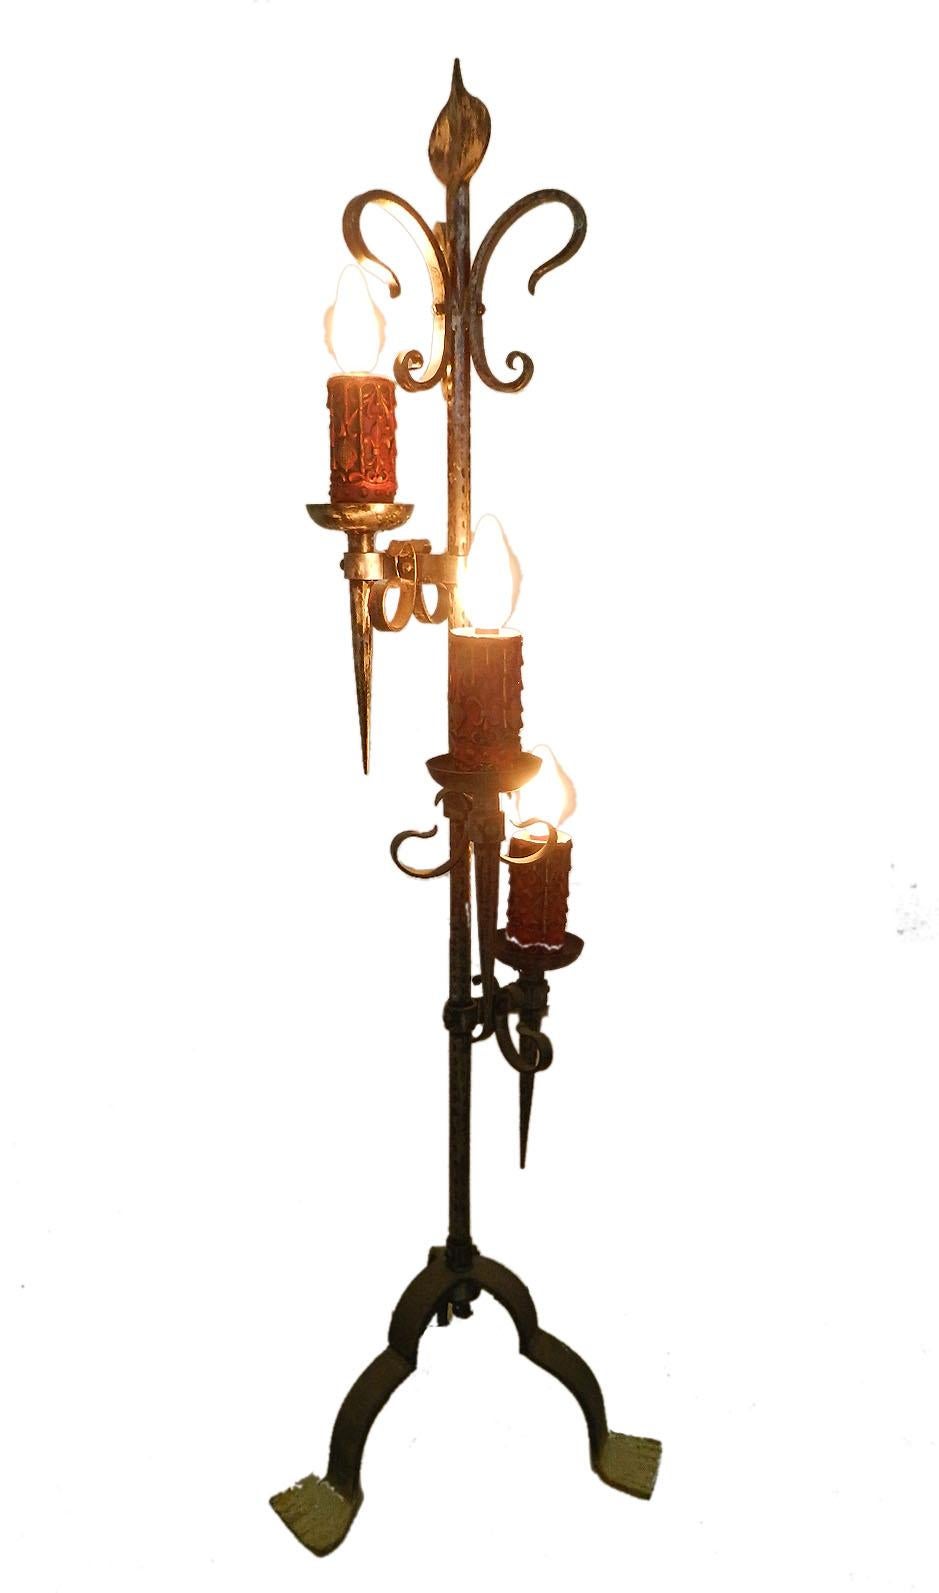 Spanish floor lamp circa 1960 artisan made wrought iron one of a Kind
3 bulb lights with large faux candle sleeves
Hammered Iron
This can be re-wired and tested to USA or European and UK standards.